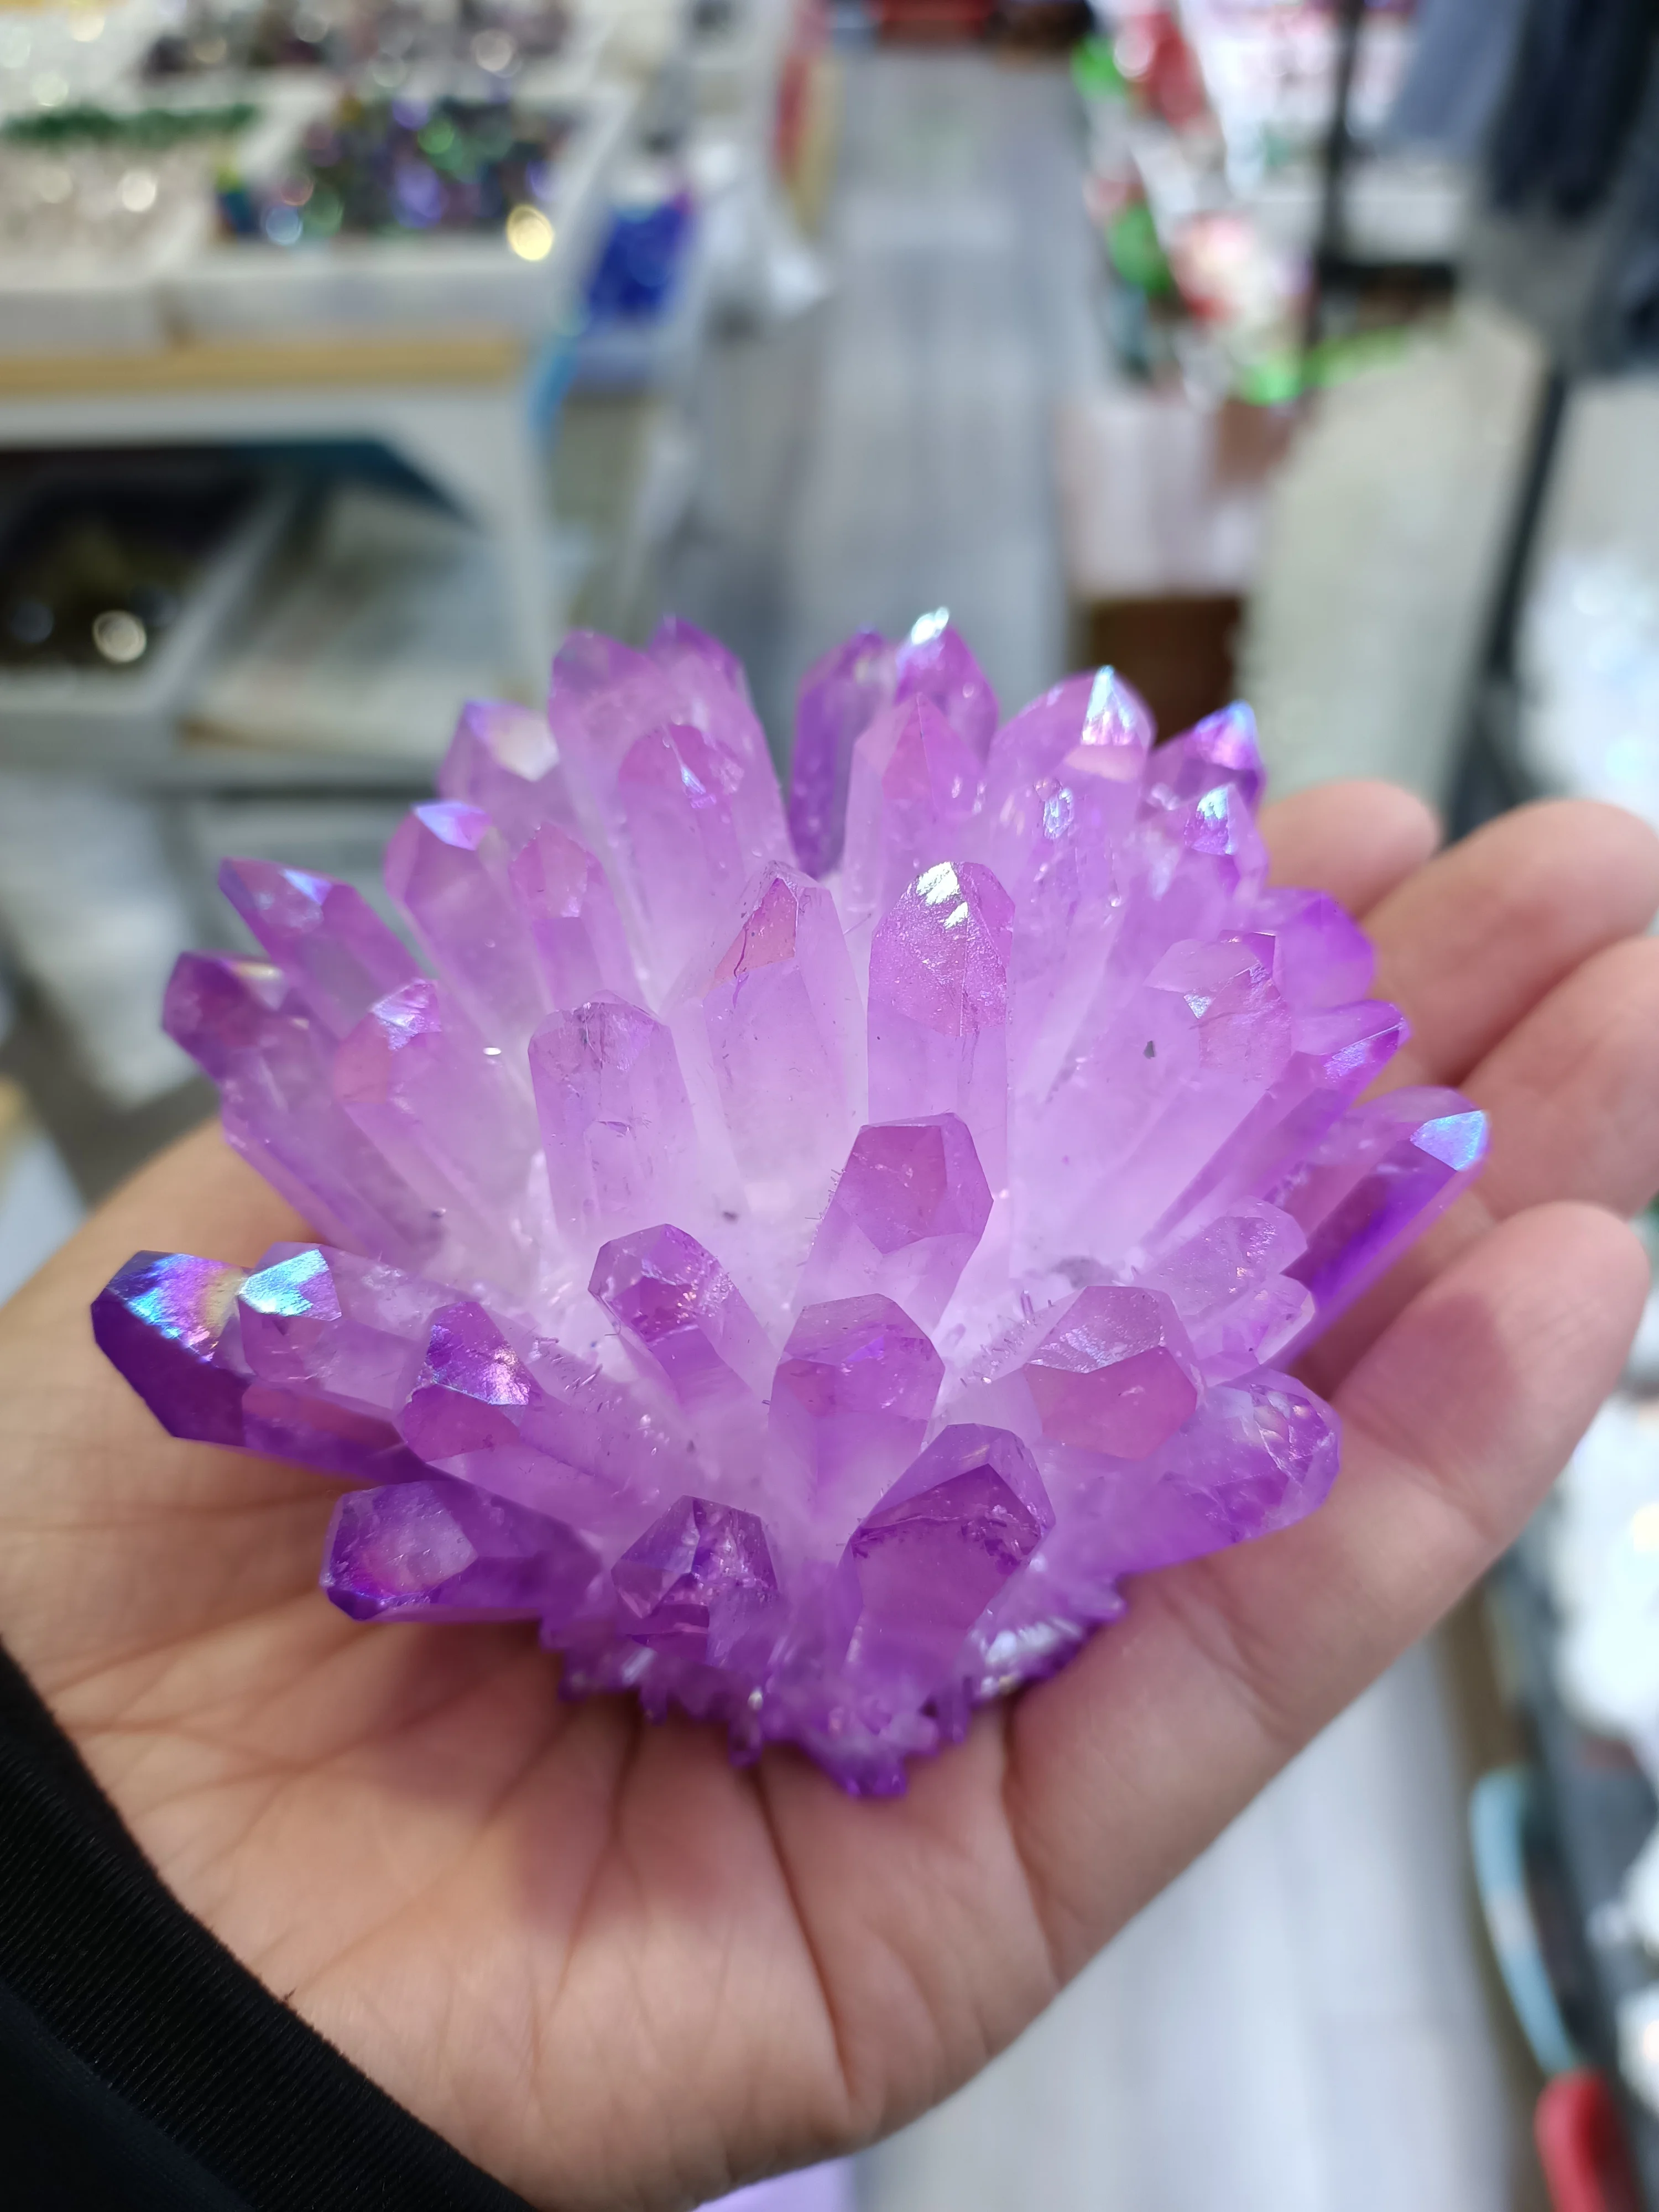 

Electroplated purple Crystal Cluster Mineral Specimen Quartz Crystal Stone Healing Home Office Decoration Gift